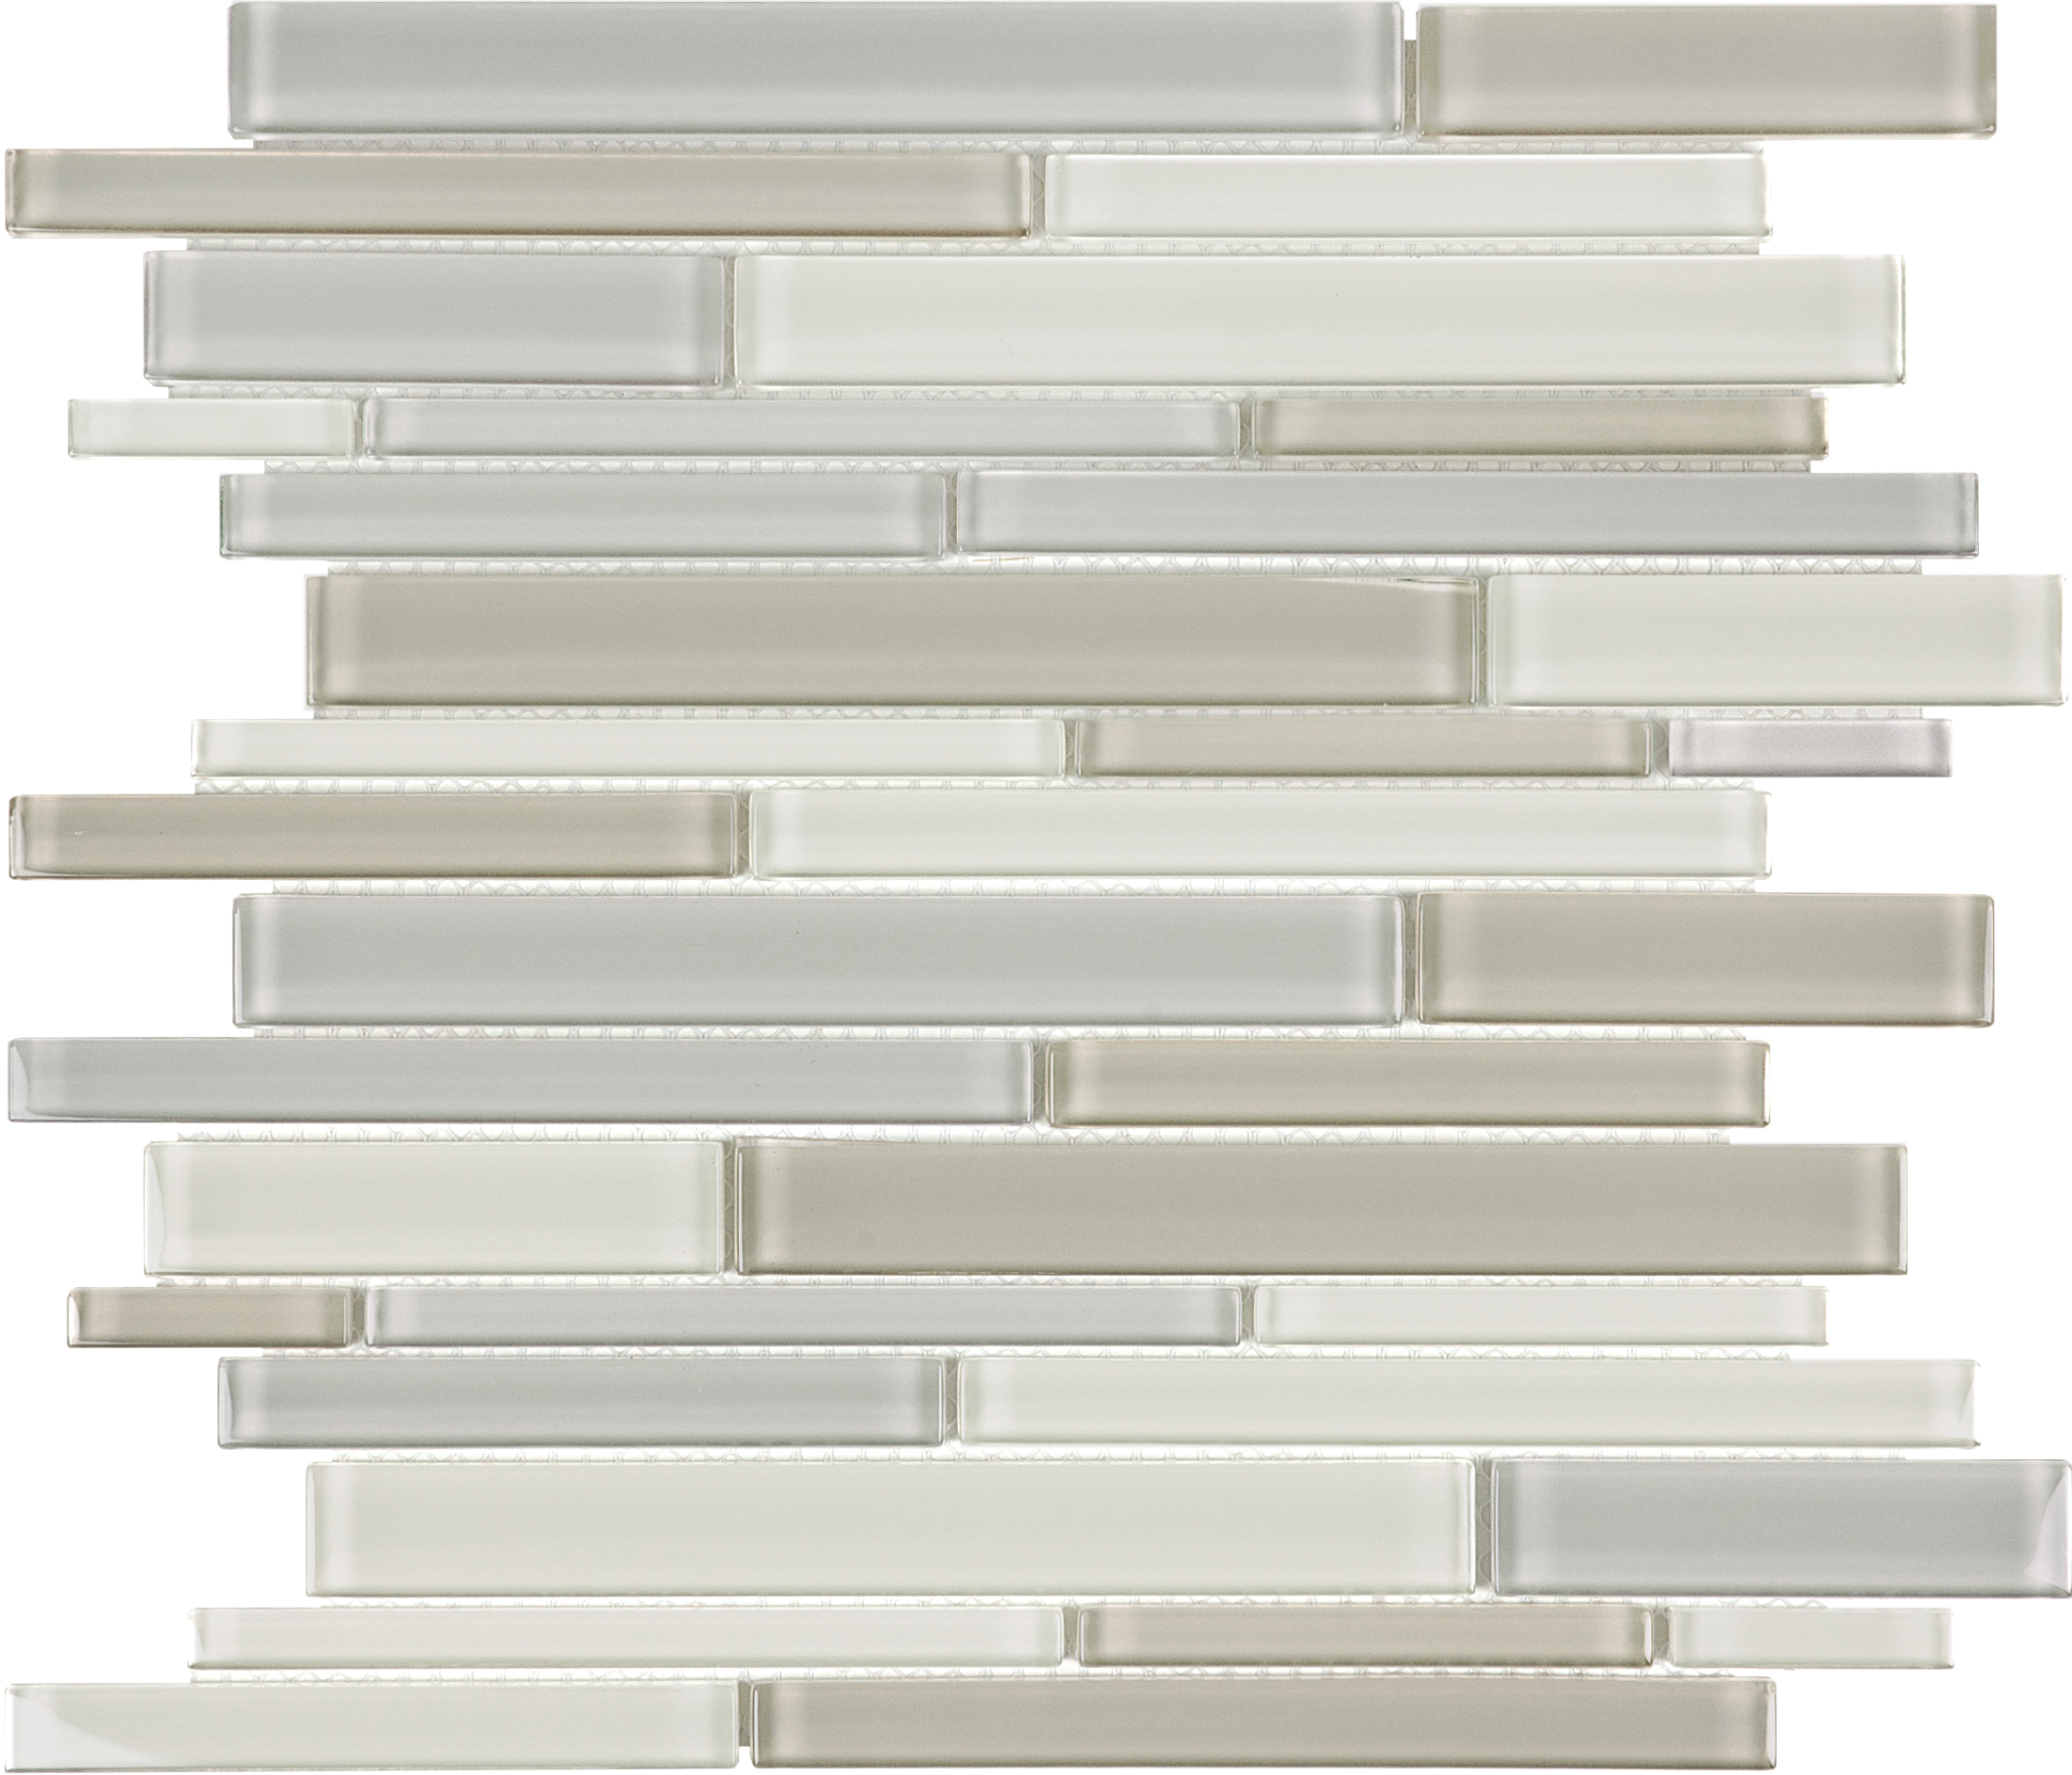 natural random strip pattern fused glass mosaic glass blend from element anatolia collection distributed by surface group international glossy finish rounded edge mesh shape